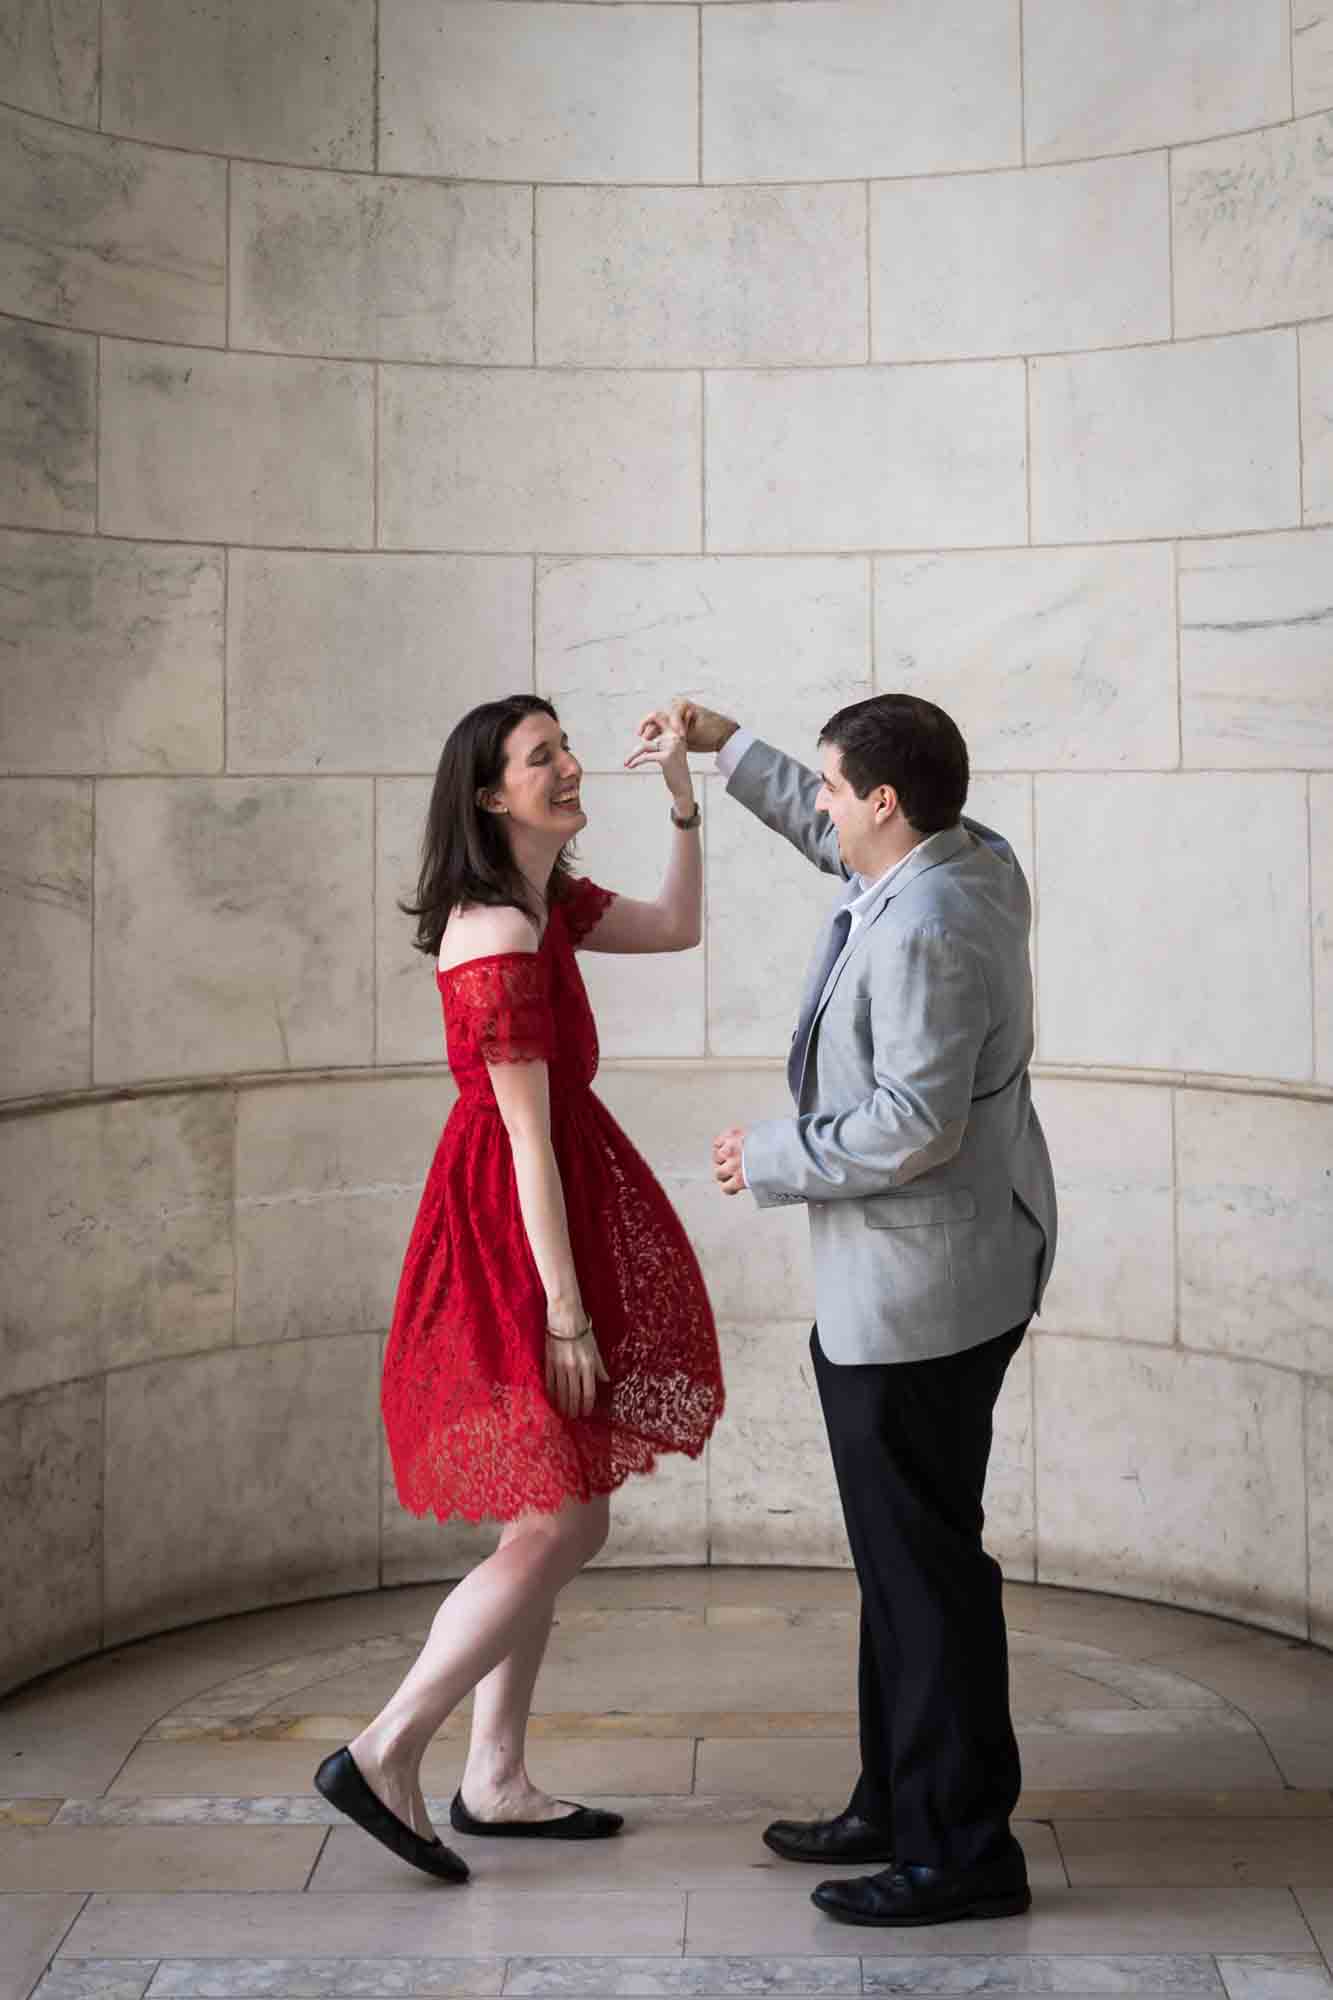 Man dancing with woman wearing red dress in marble alcove Couple hugging in marble alcove with woman wearing red dress during a New York Public Library surprise proposal